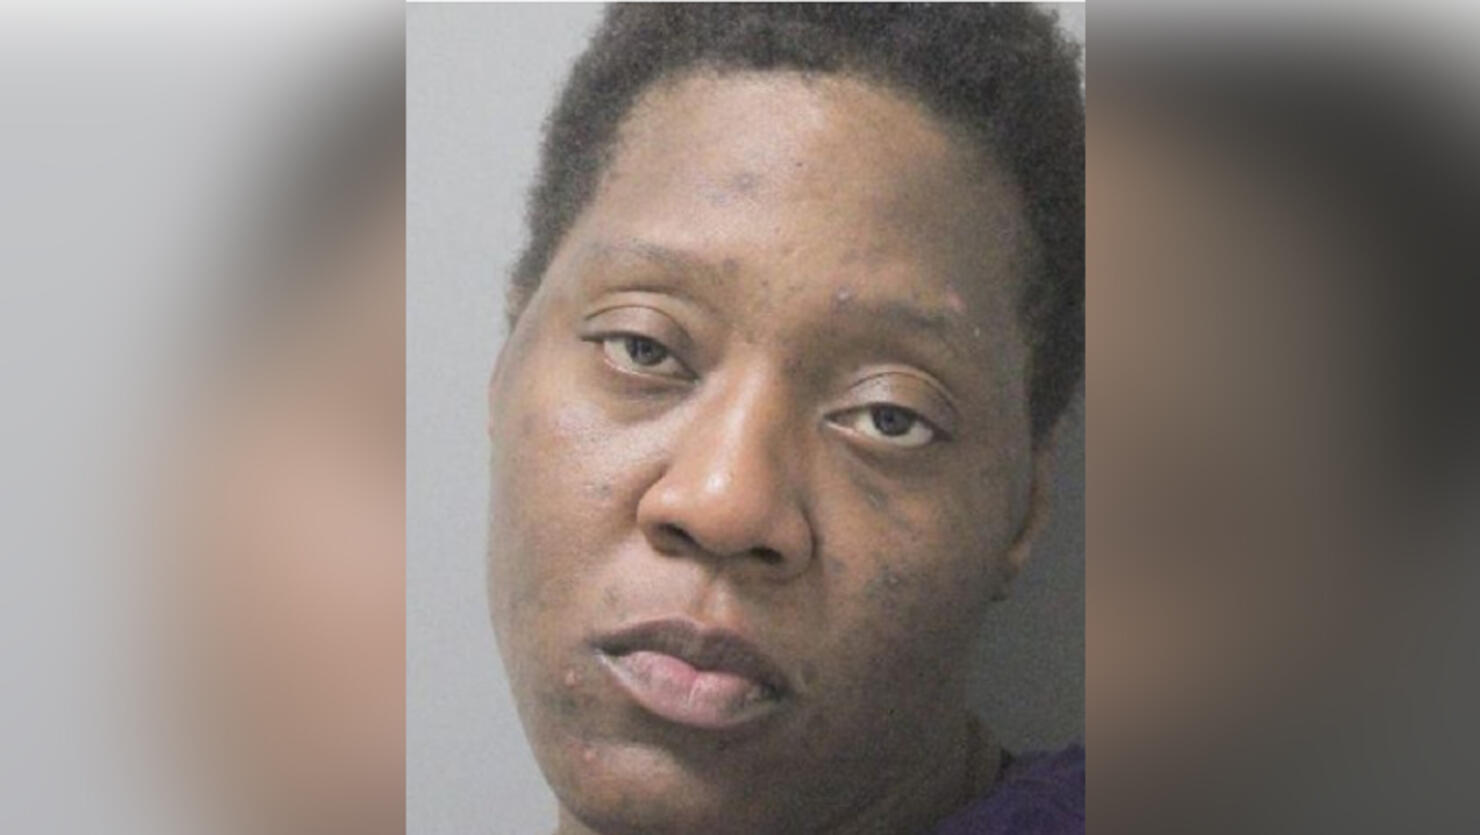 Woman arrested after breaking into strangers home 